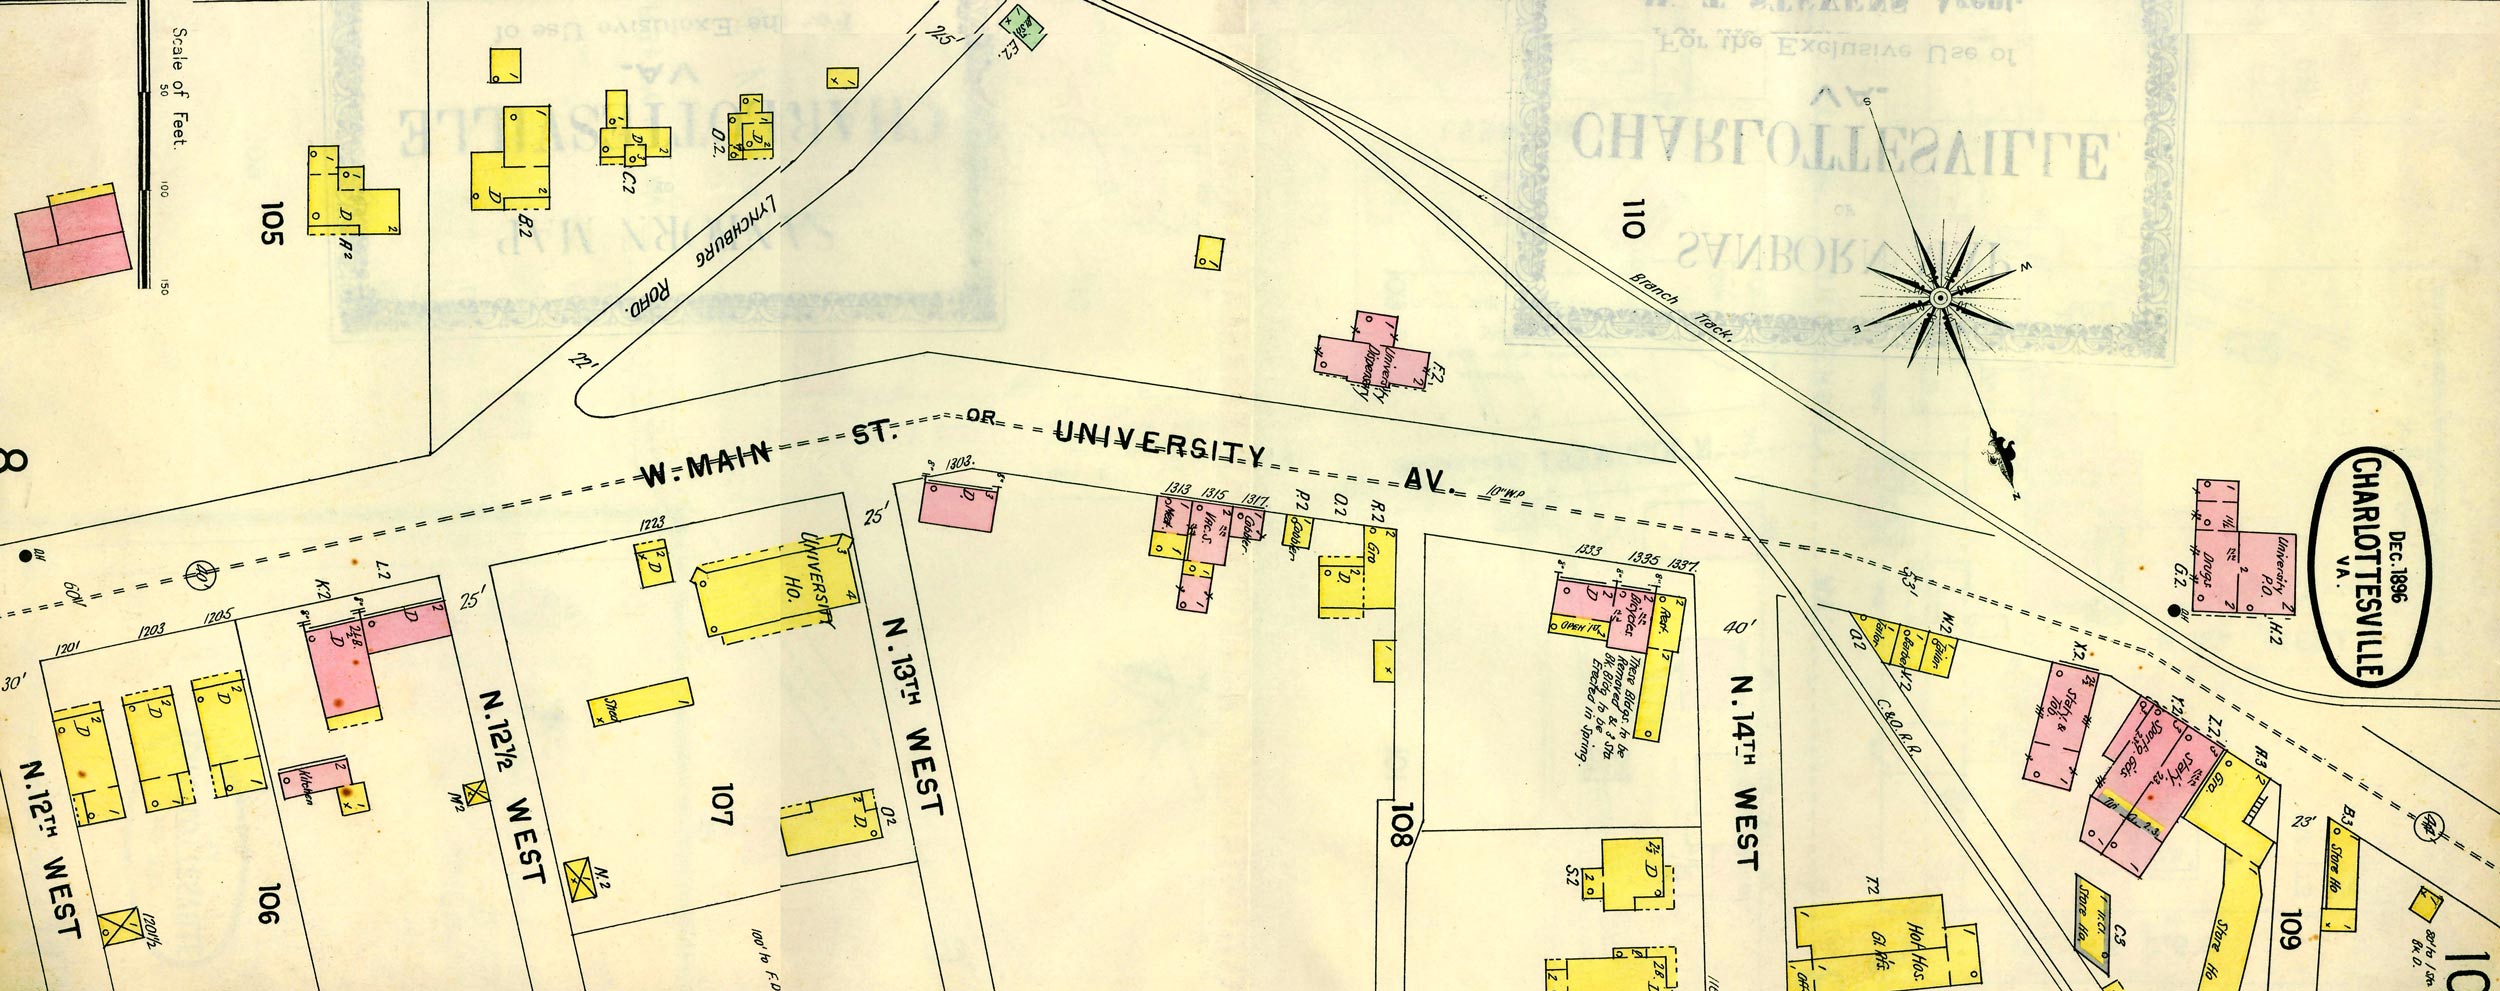 An 1896 Sanborn Map shows the spur line coming off the main rail line and extending along the Long Walk onto University Grounds. 